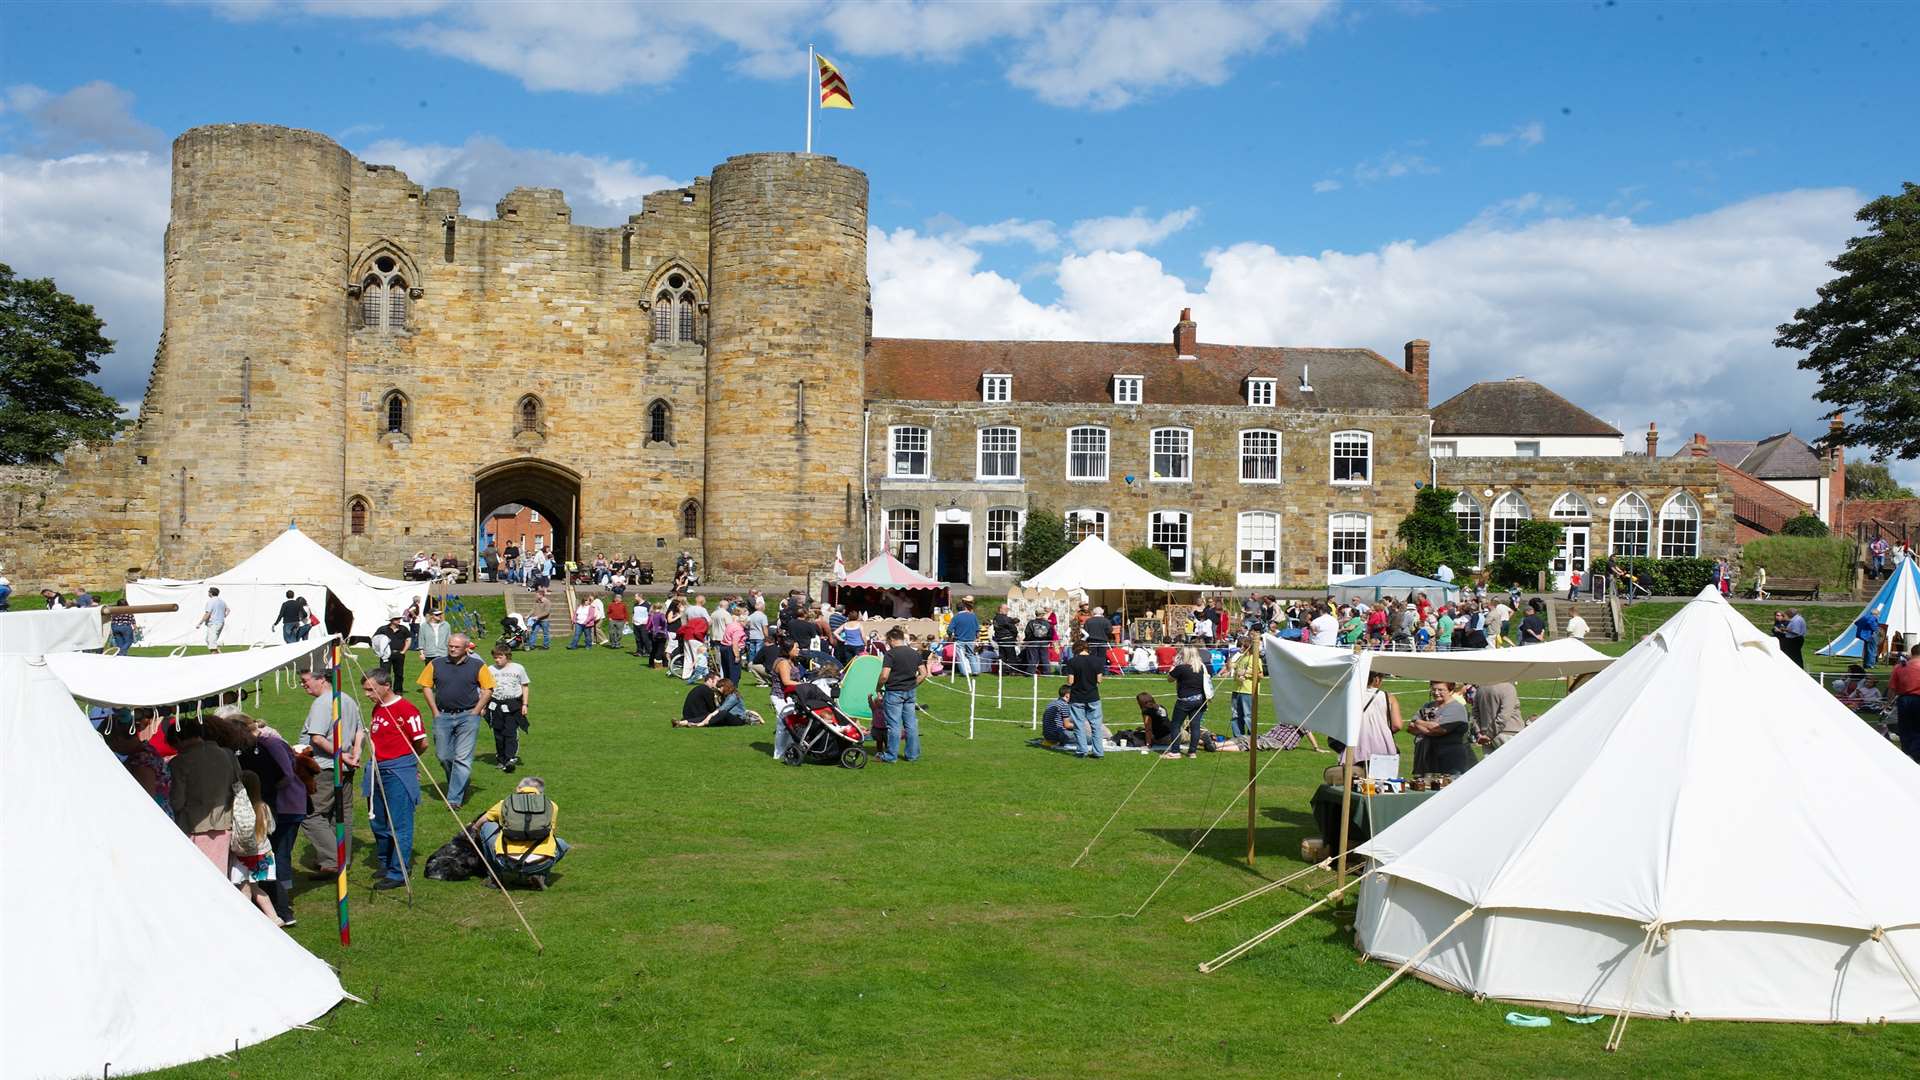 Stallholders demonstrating their crafts and wares from the middle ages are invited to take part in the Medieval Fair.